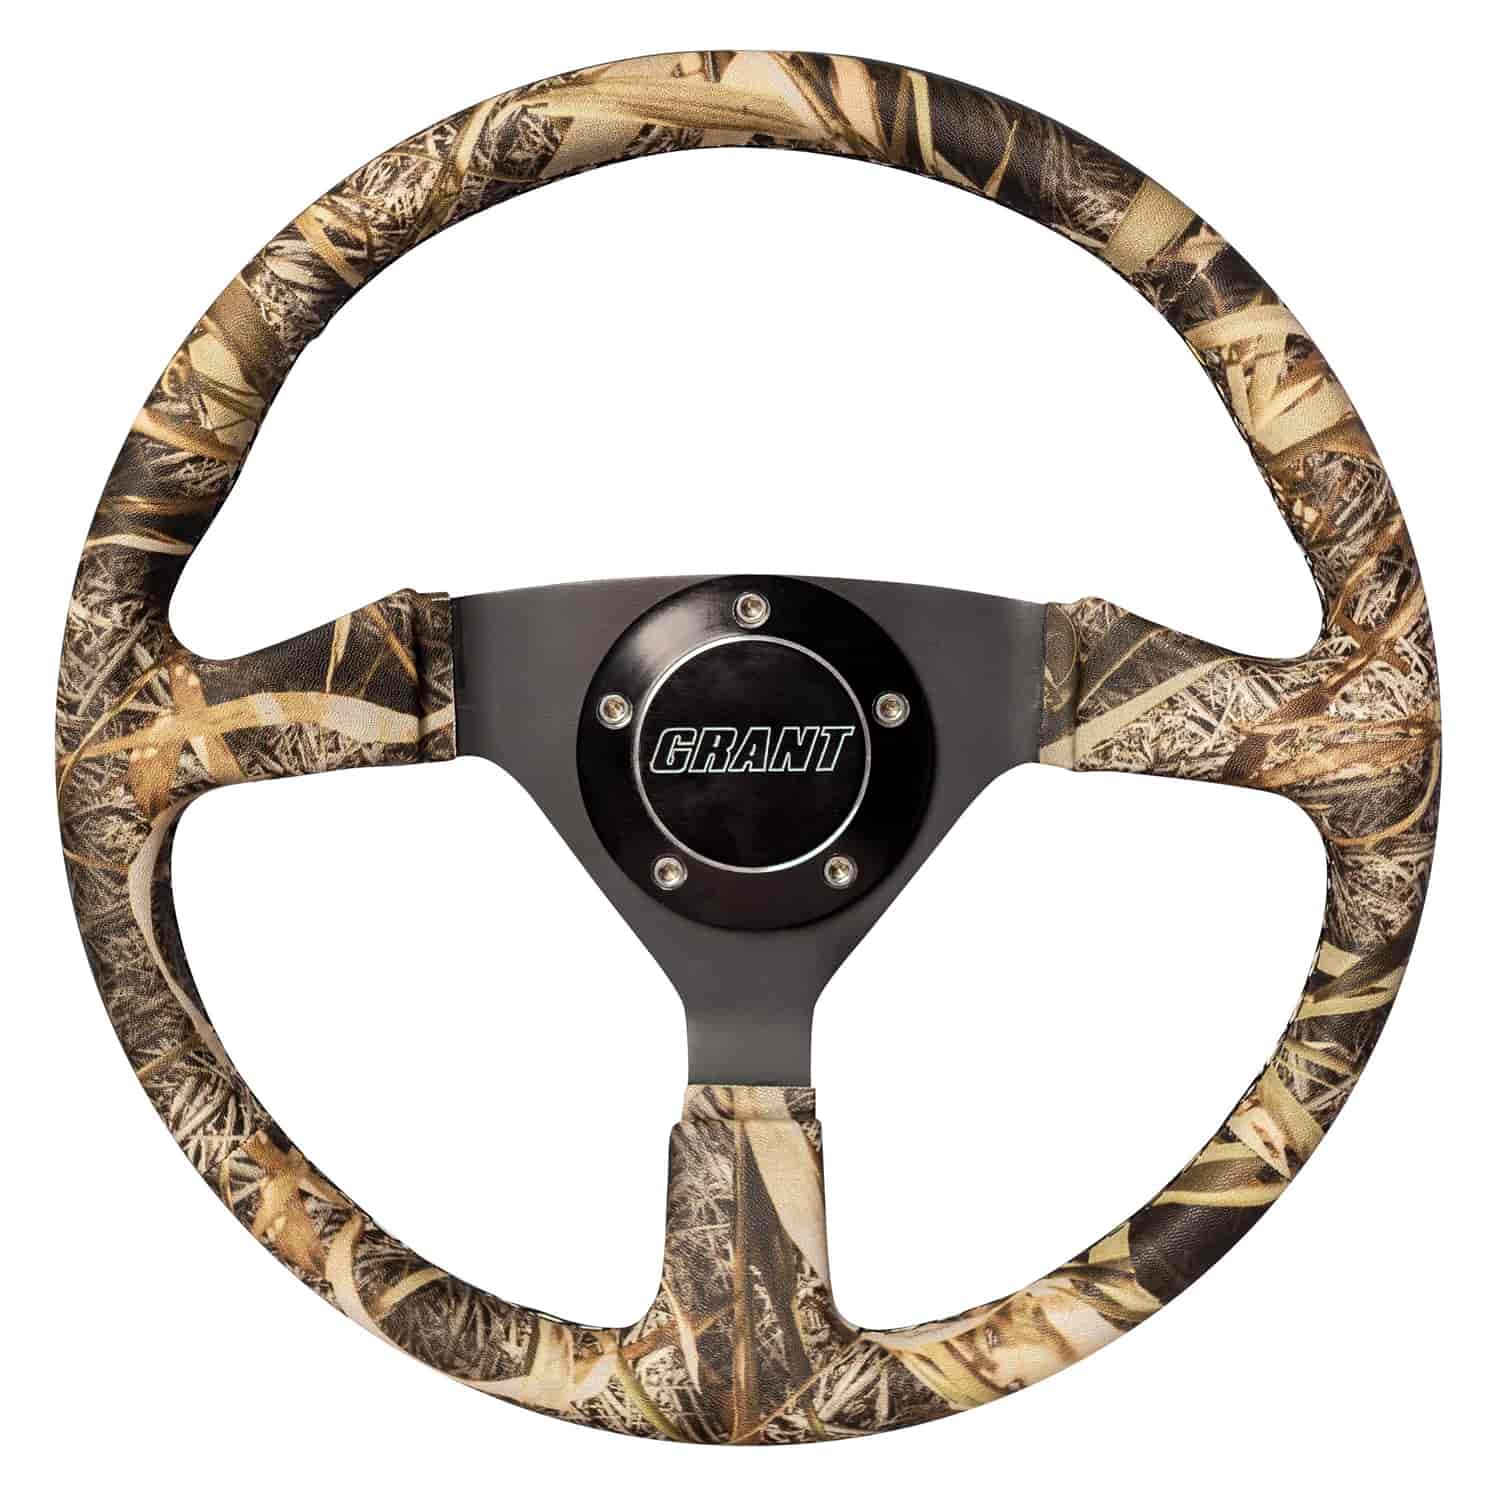 Formula-1 Series Steering Wheel Satin Black Anodized with Camo All Weather Vinyl Grip